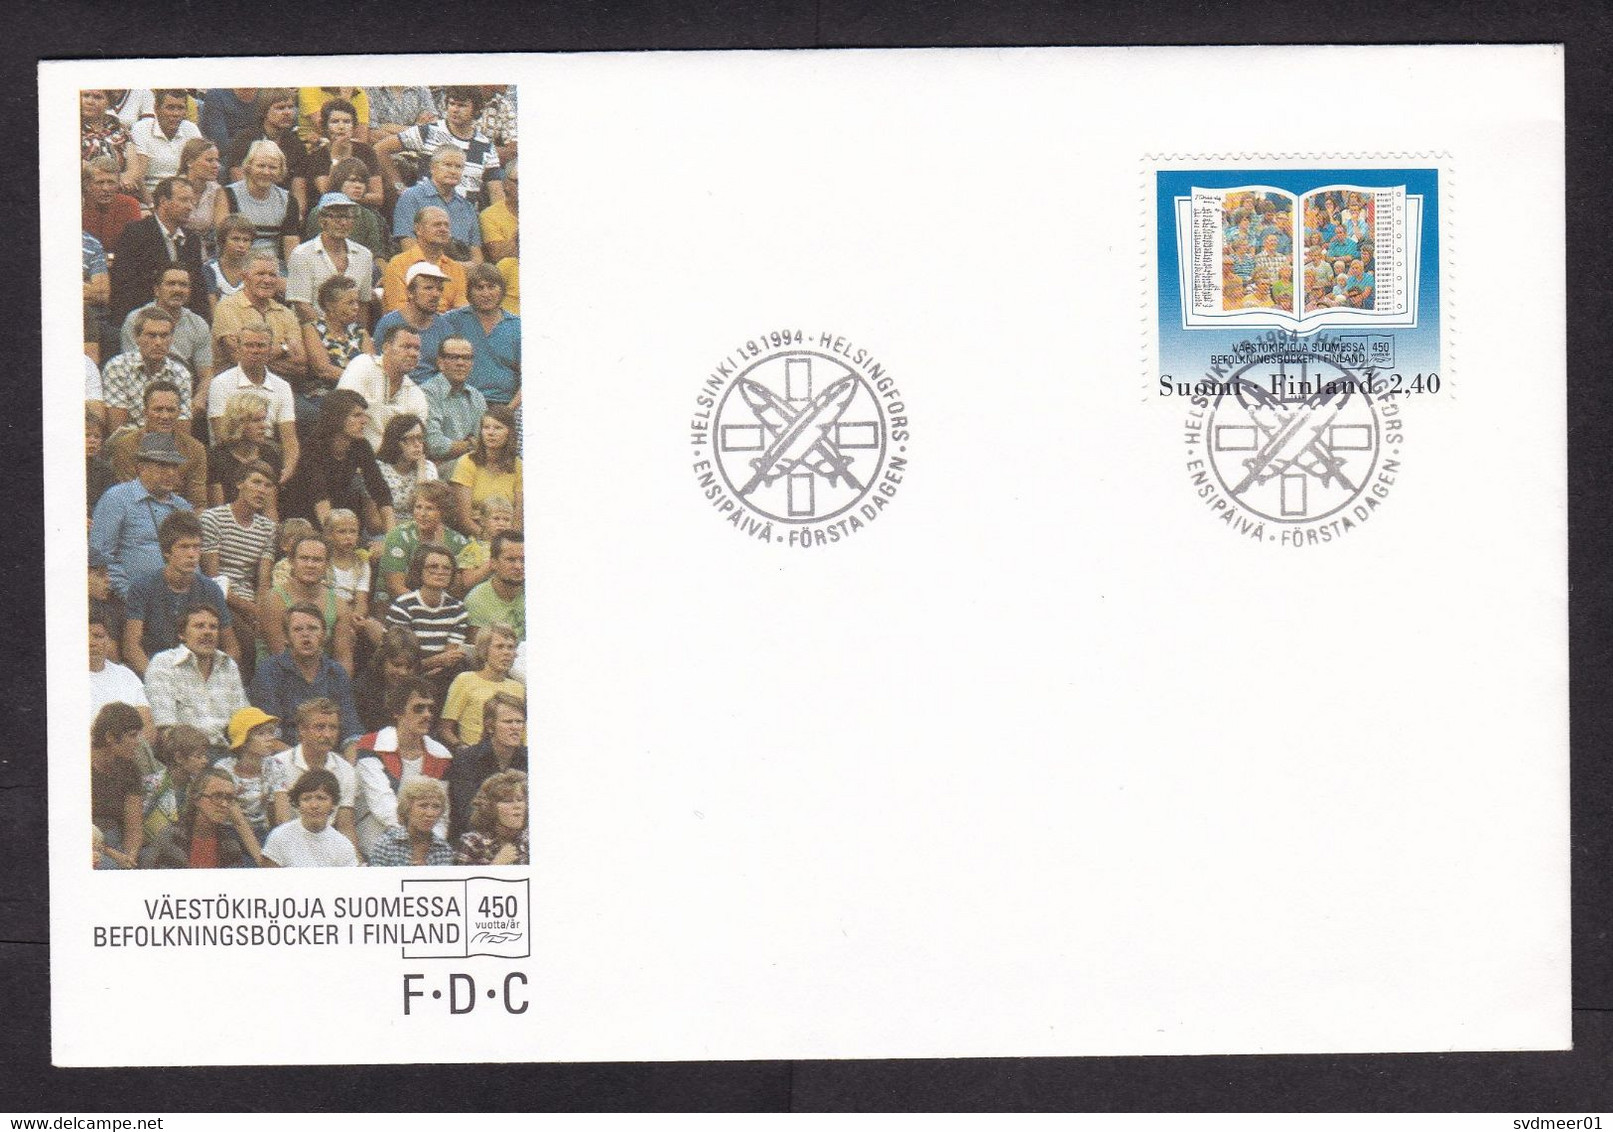 Finland: FDC First Day Cover, 1994, 1 Stamp, Population Registry Book, People Register (very Minor Crease) - Storia Postale